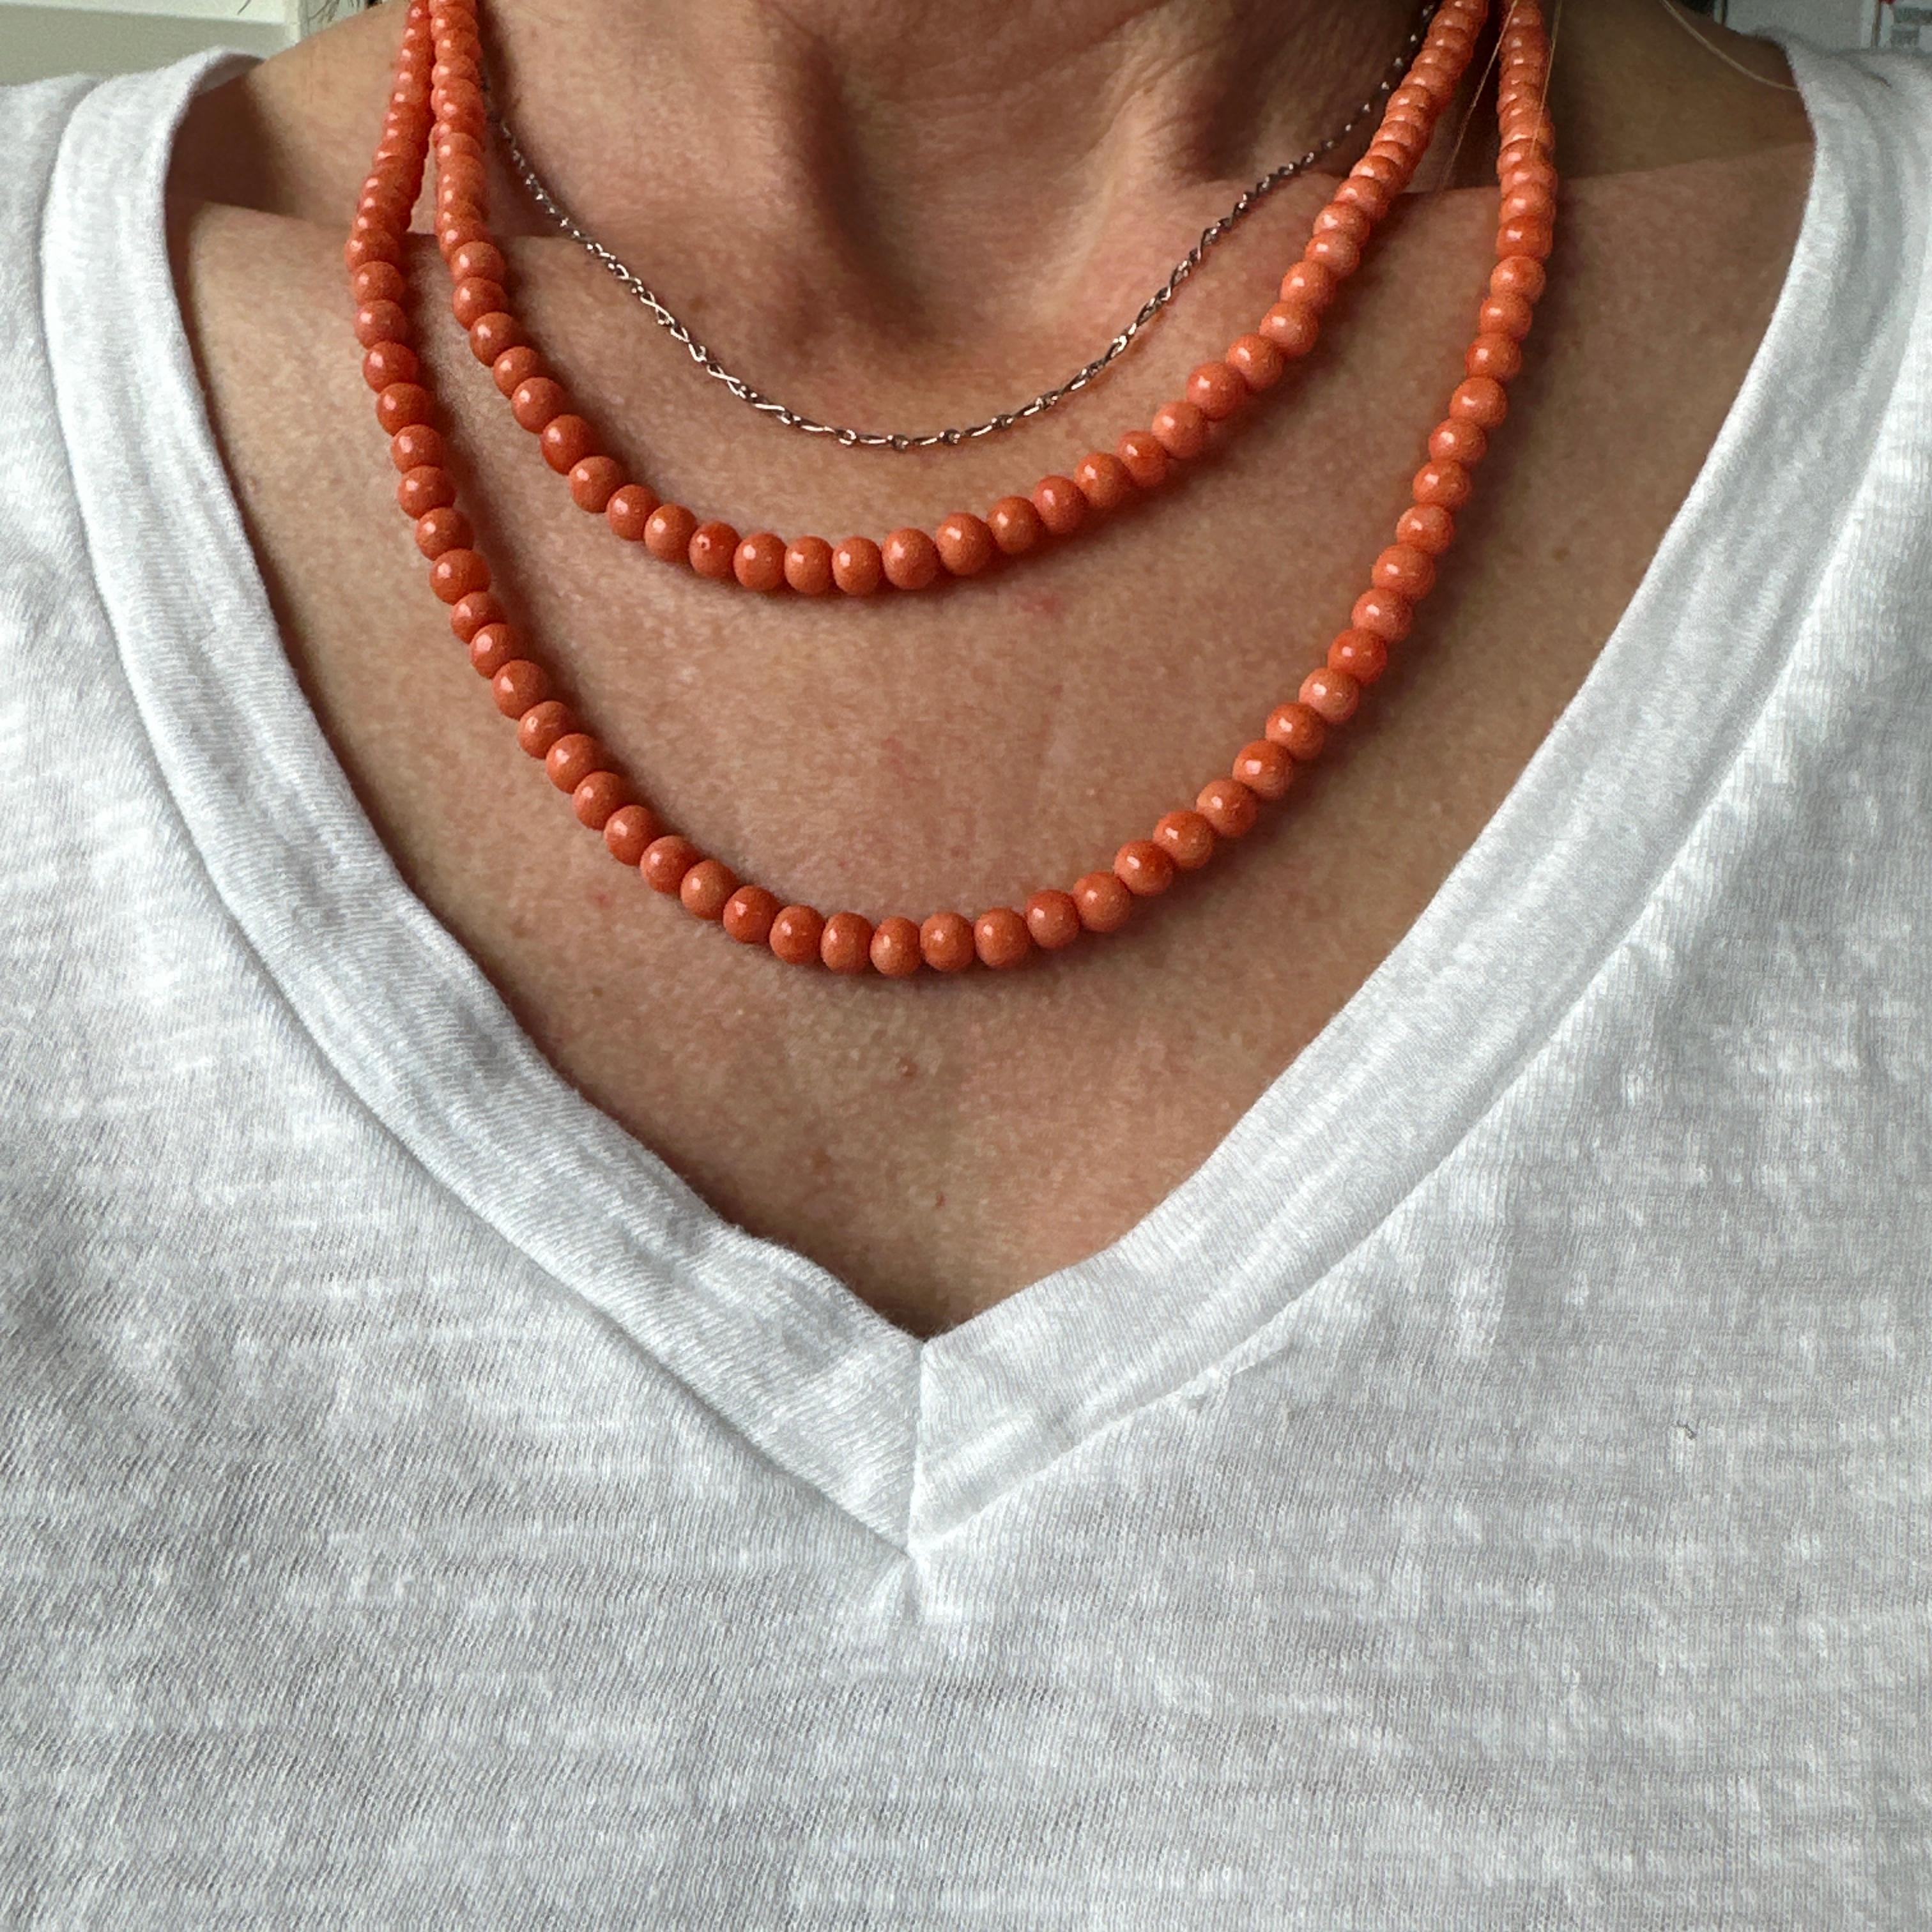 Details:
Lovely vintage strand of angel skin red coral. Measuring a generous length of 36 inches long including the clasp. The gold clasp is adorned with a coral cabochon. It opens and closes securely. This wonderful necklace displays the fantastic